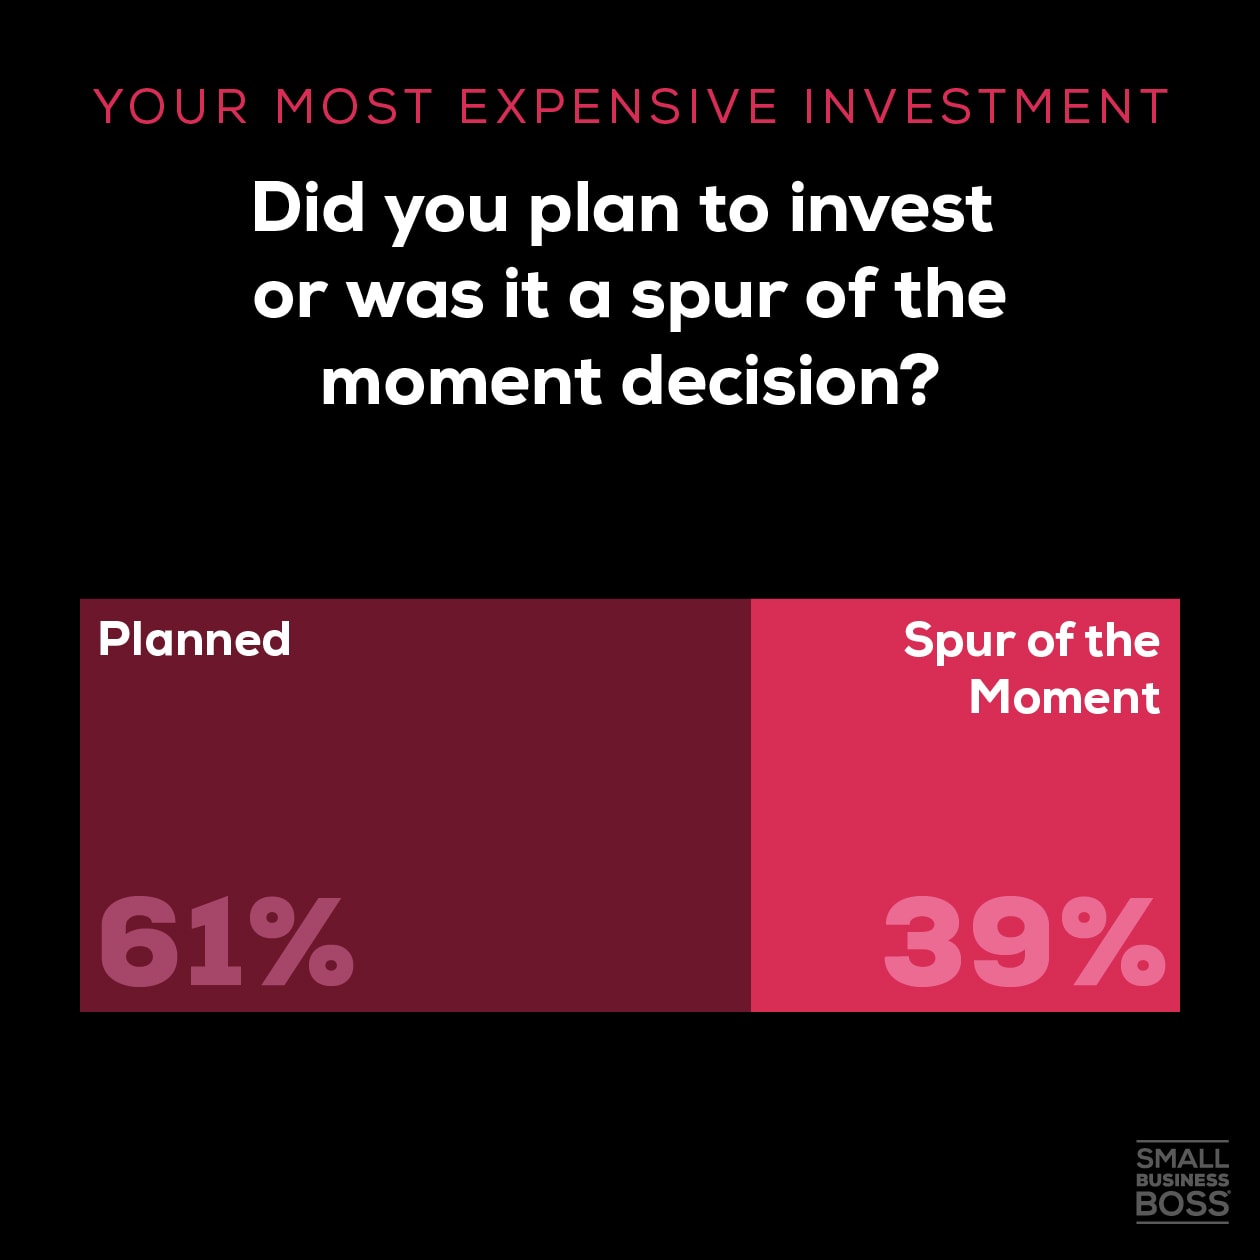 Most expensive investment-planned or not